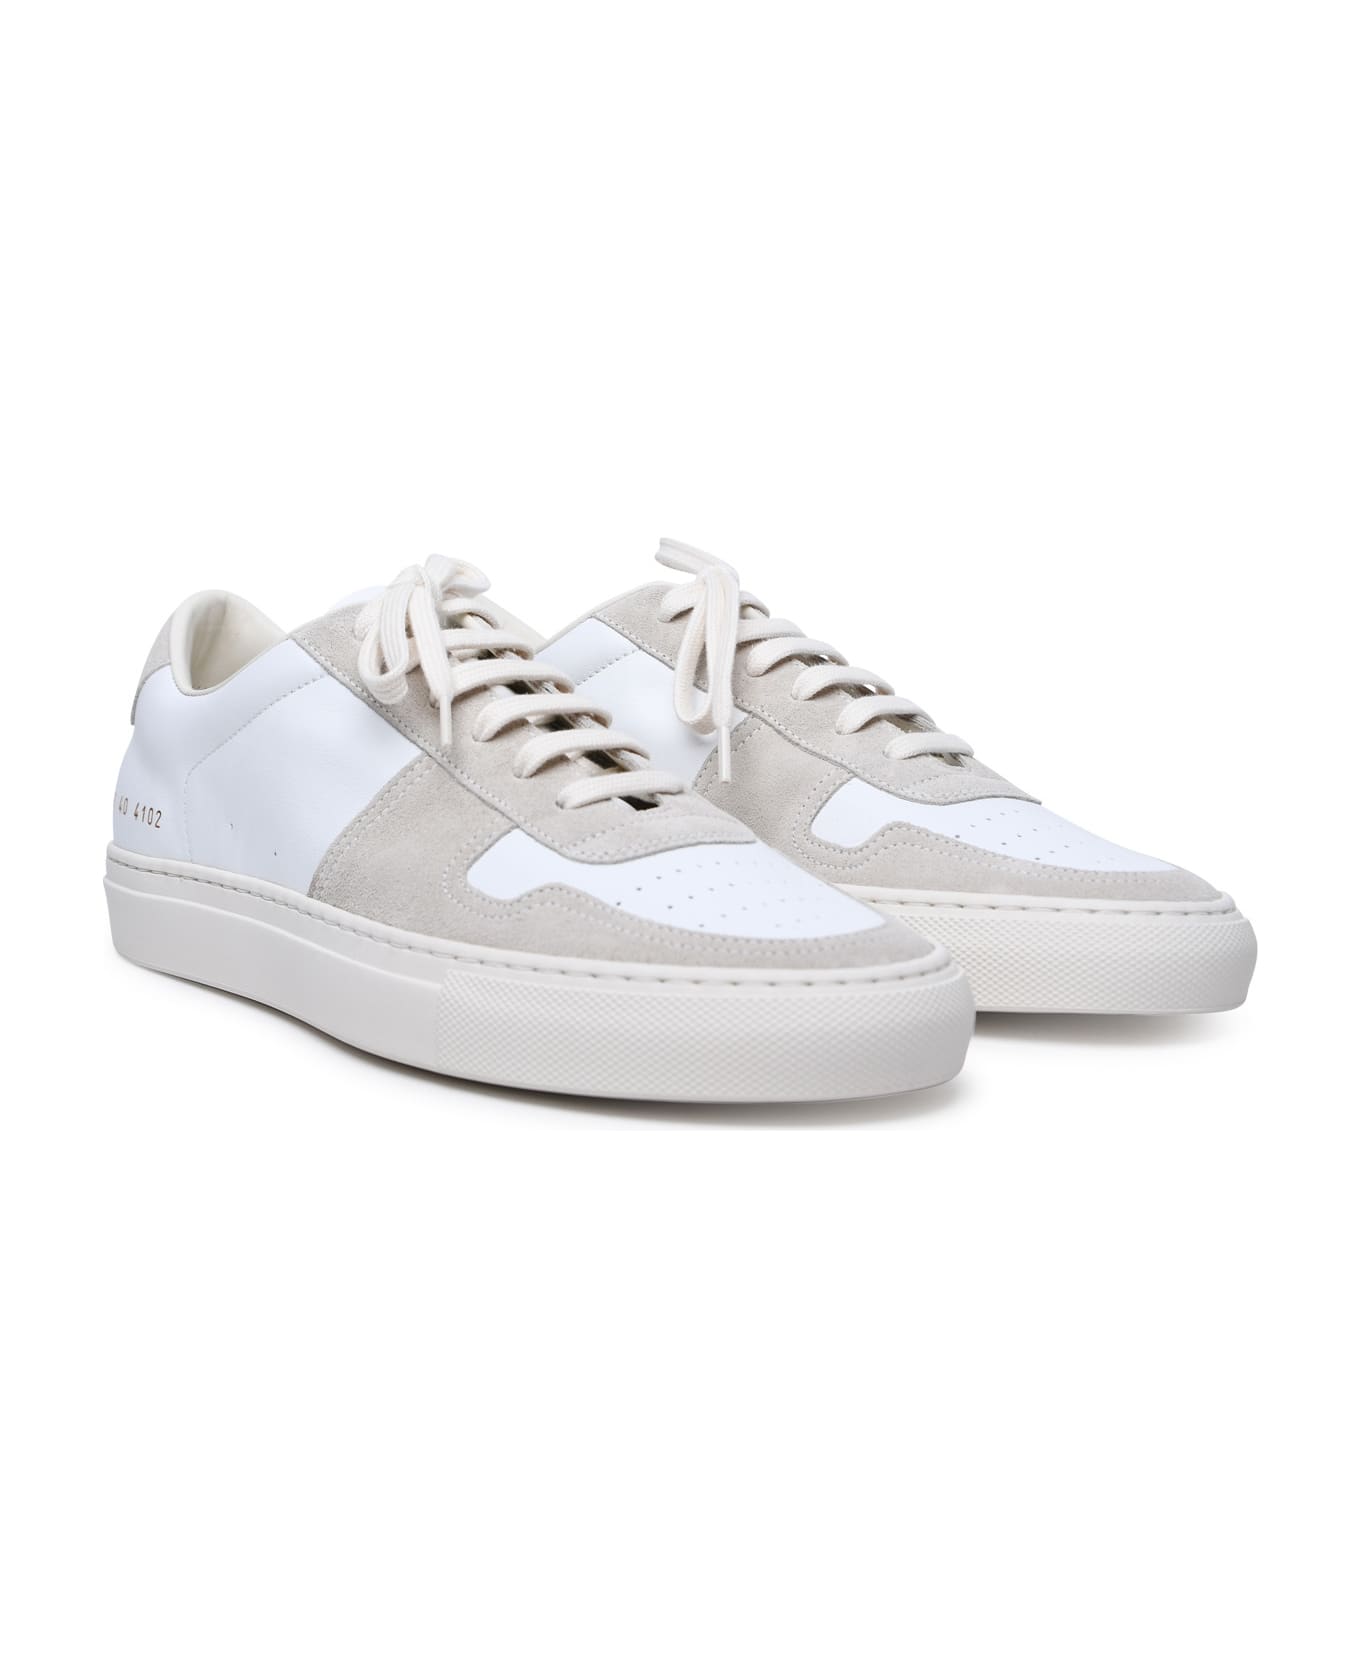 Common Projects 'bball Duo' White Leather Sneakers - White スニーカー